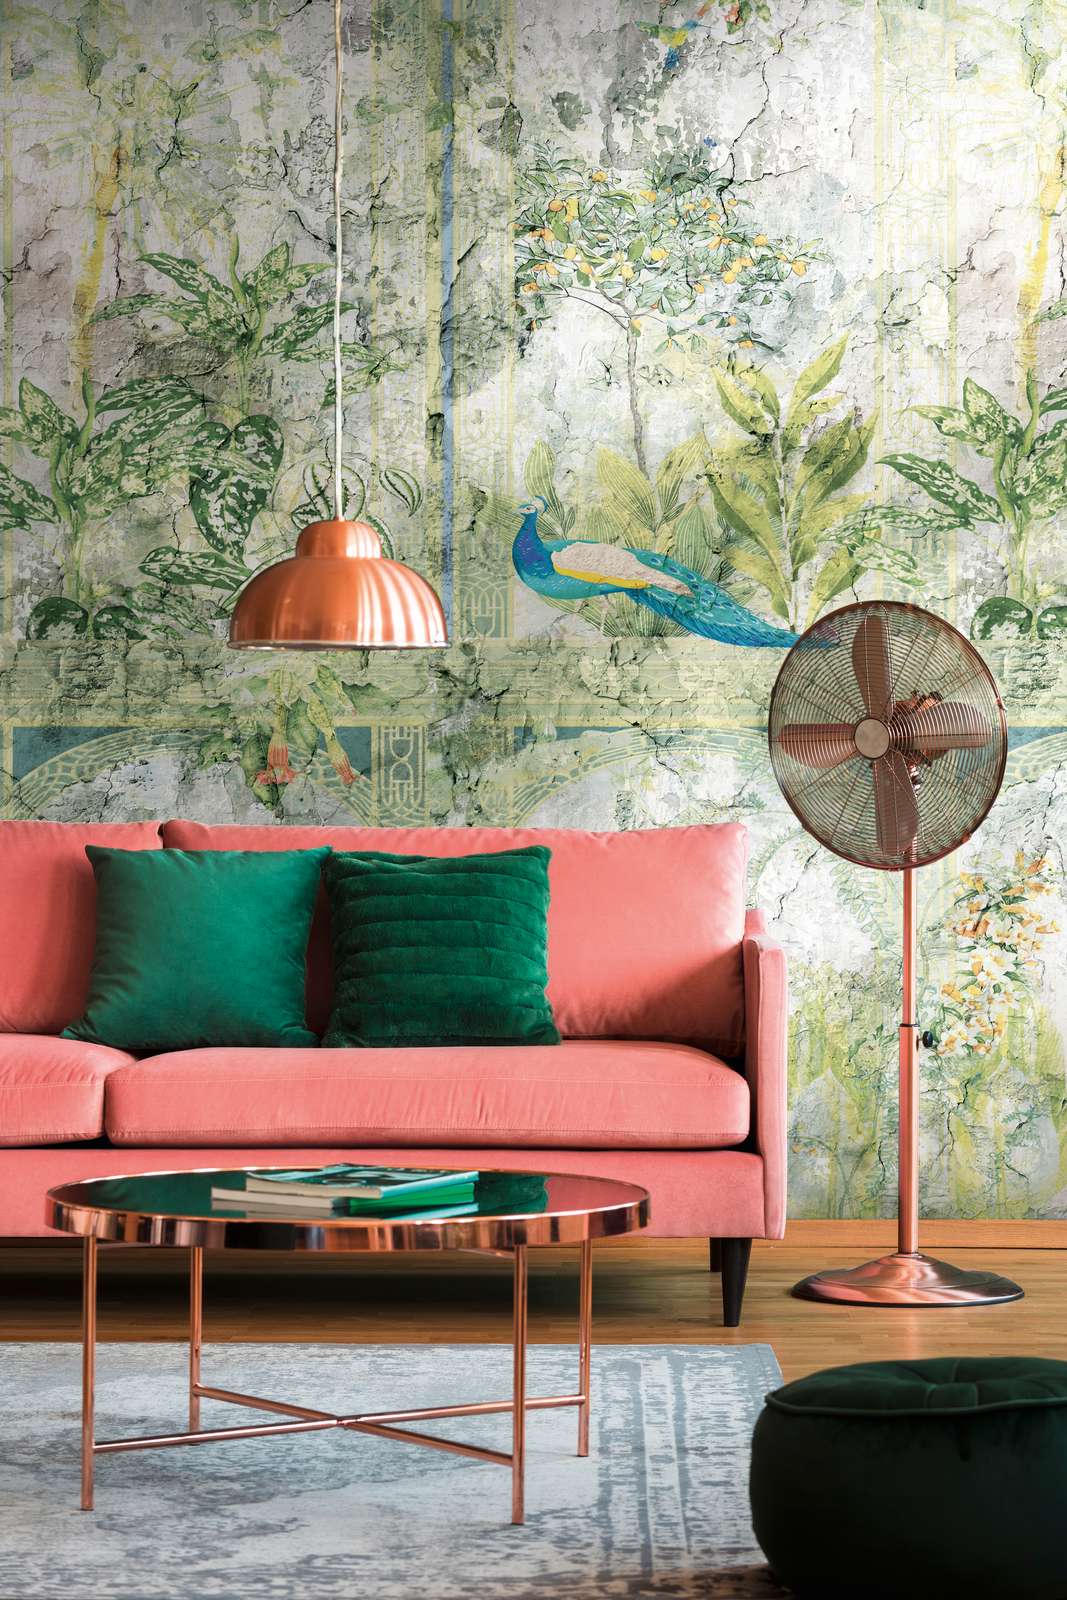             Wallpaper with jungle look and birds in vintage style - green, blue, grey
        